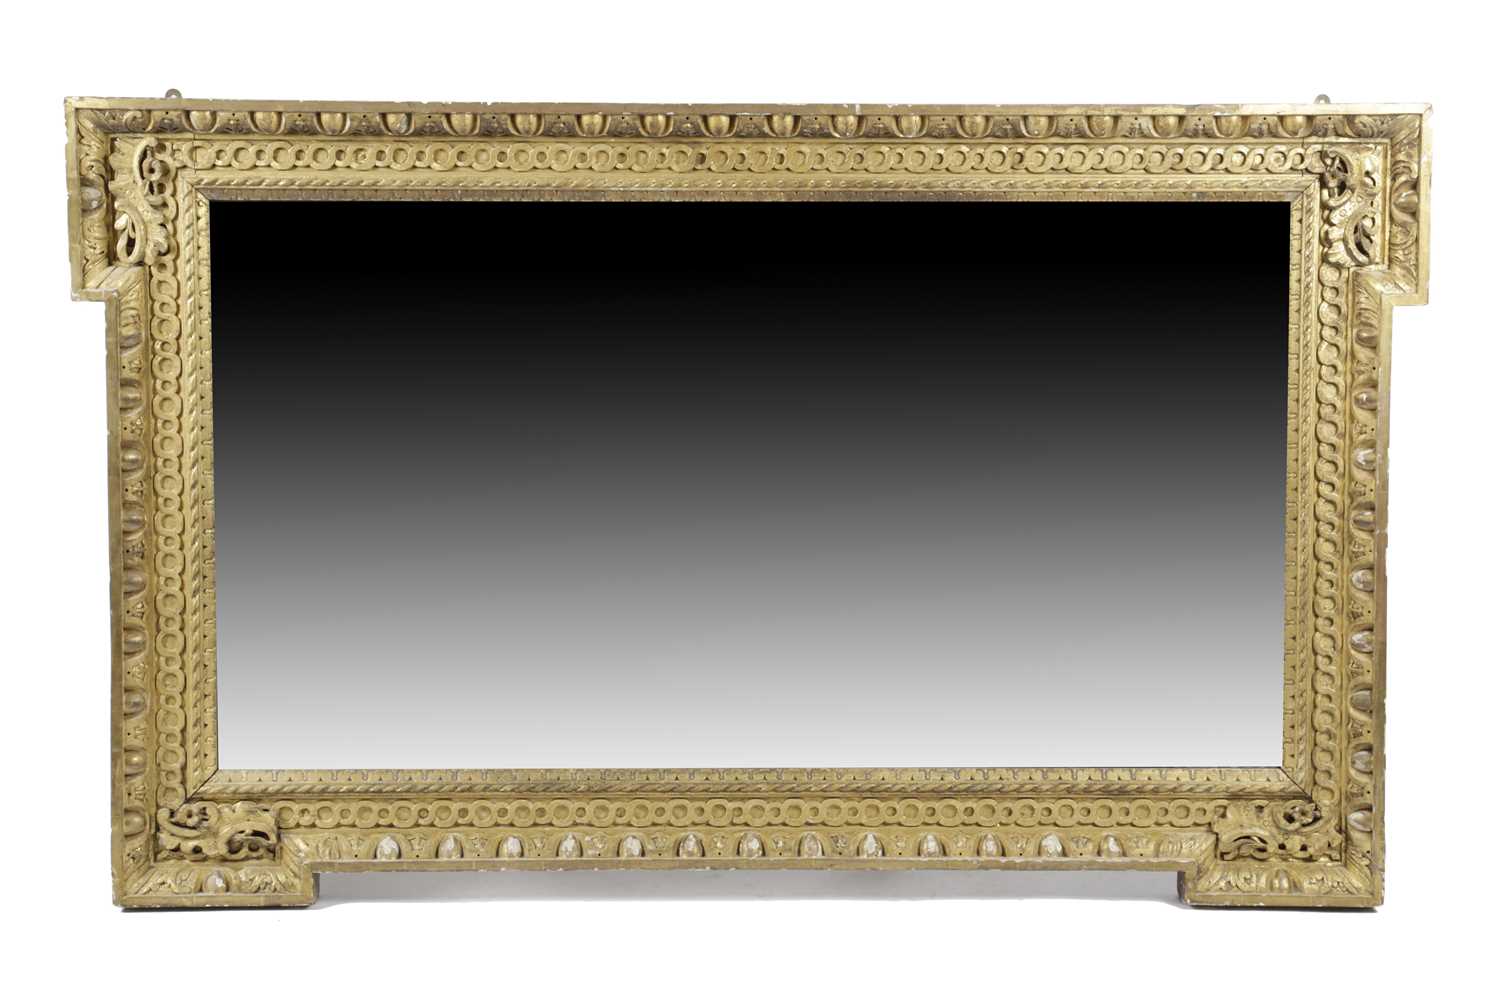 A GEORGE II GILTWOOD OVERMANTEL MIRROR IN THE MANNER OF WILLIAM KENT, C.1735 the rectangular plate